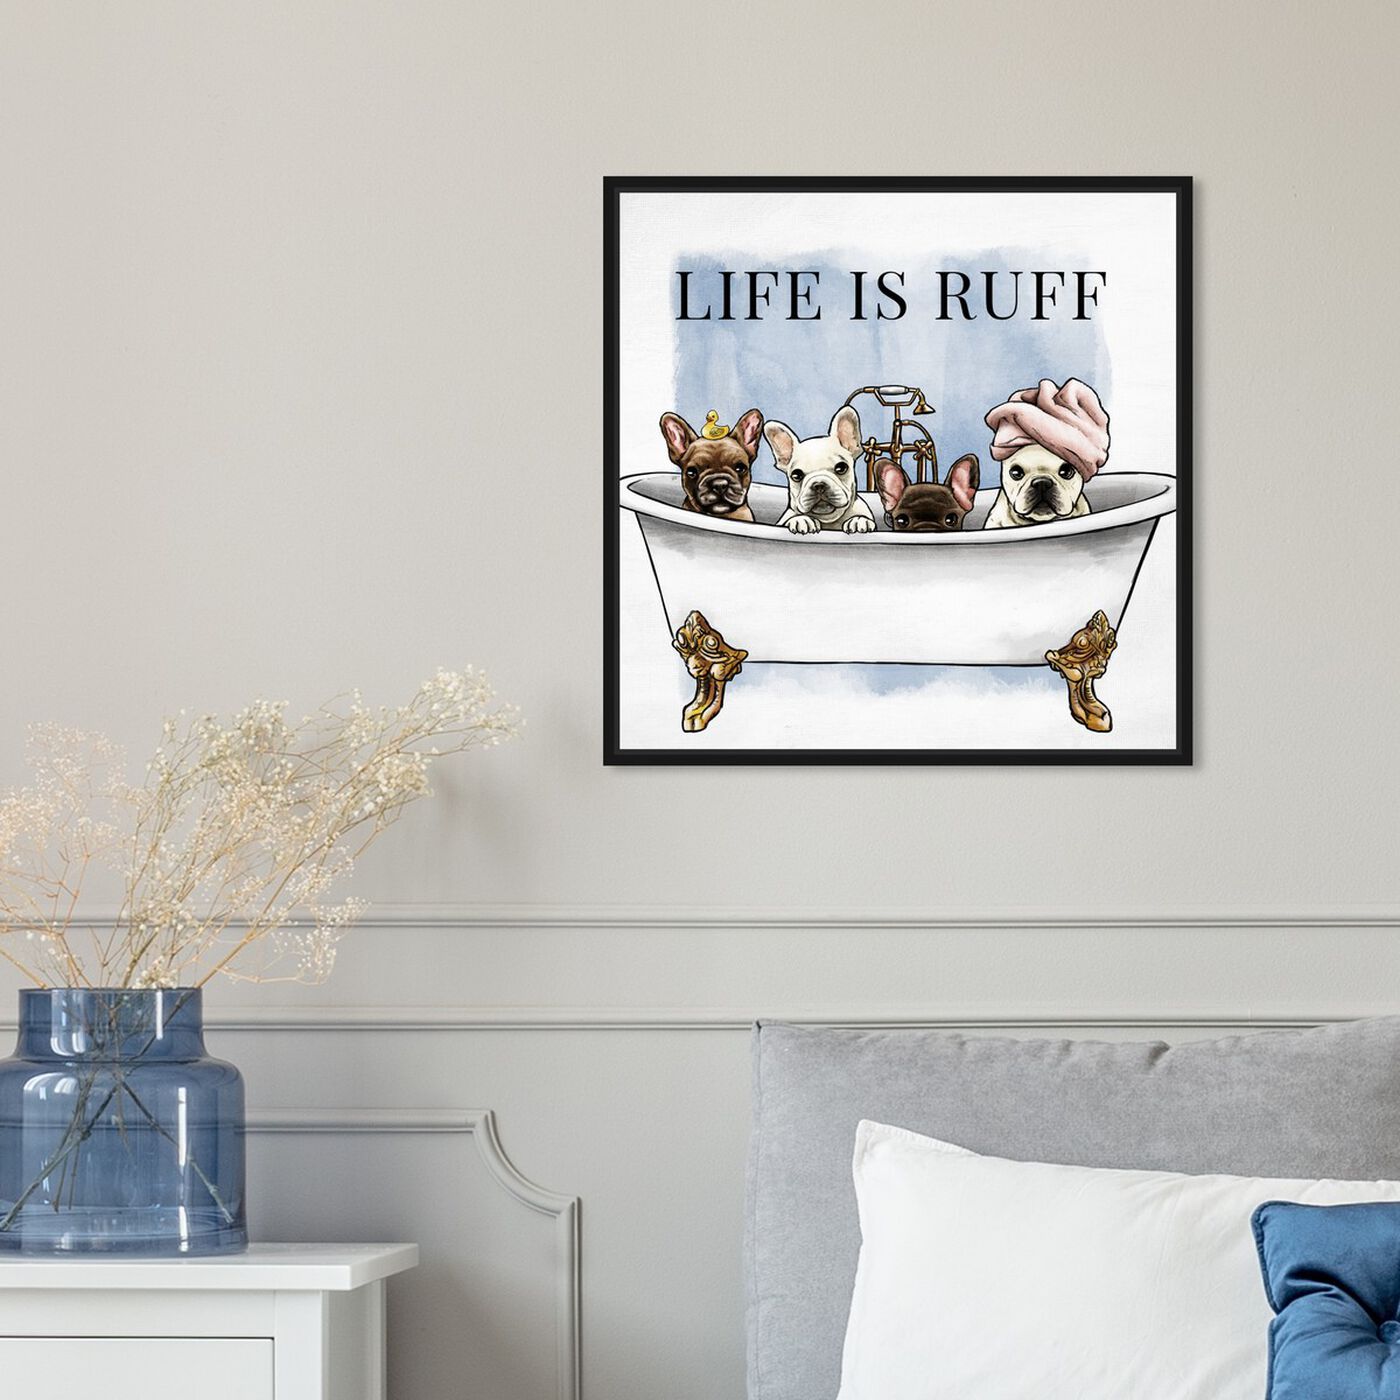 Hanging view of Life is Ruff featuring bath and laundry and bathtubs art.